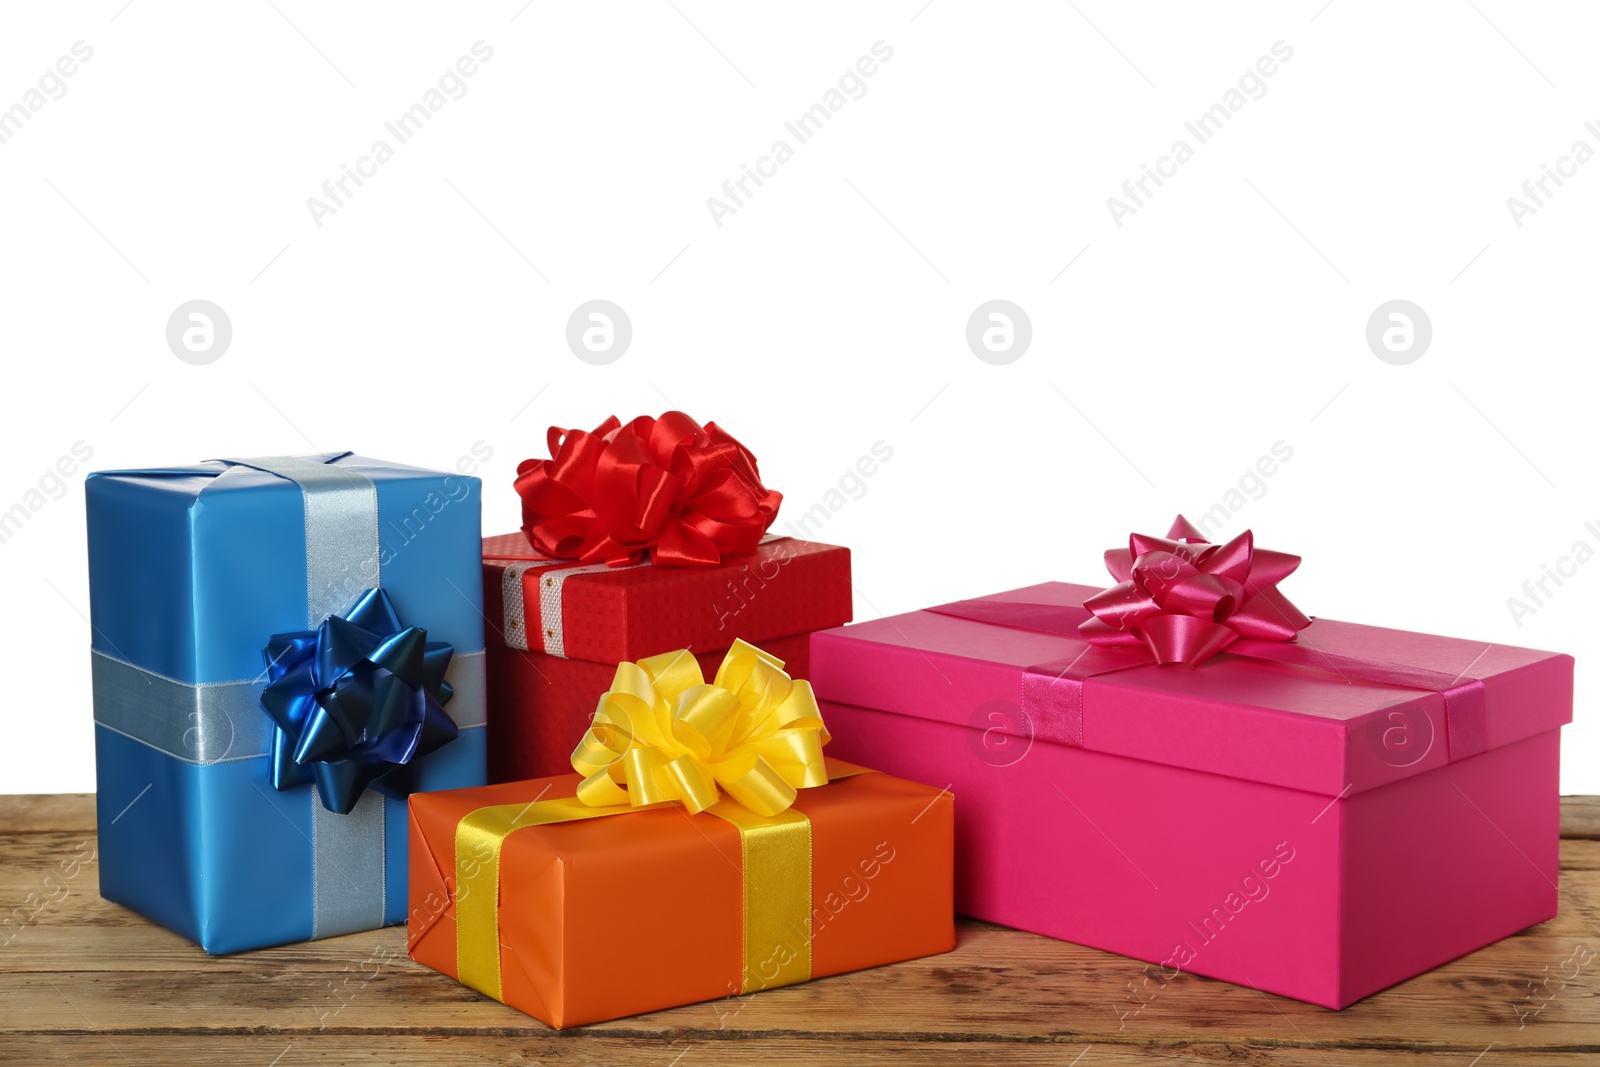 Photo of Colorful gift boxes on wooden table against white background